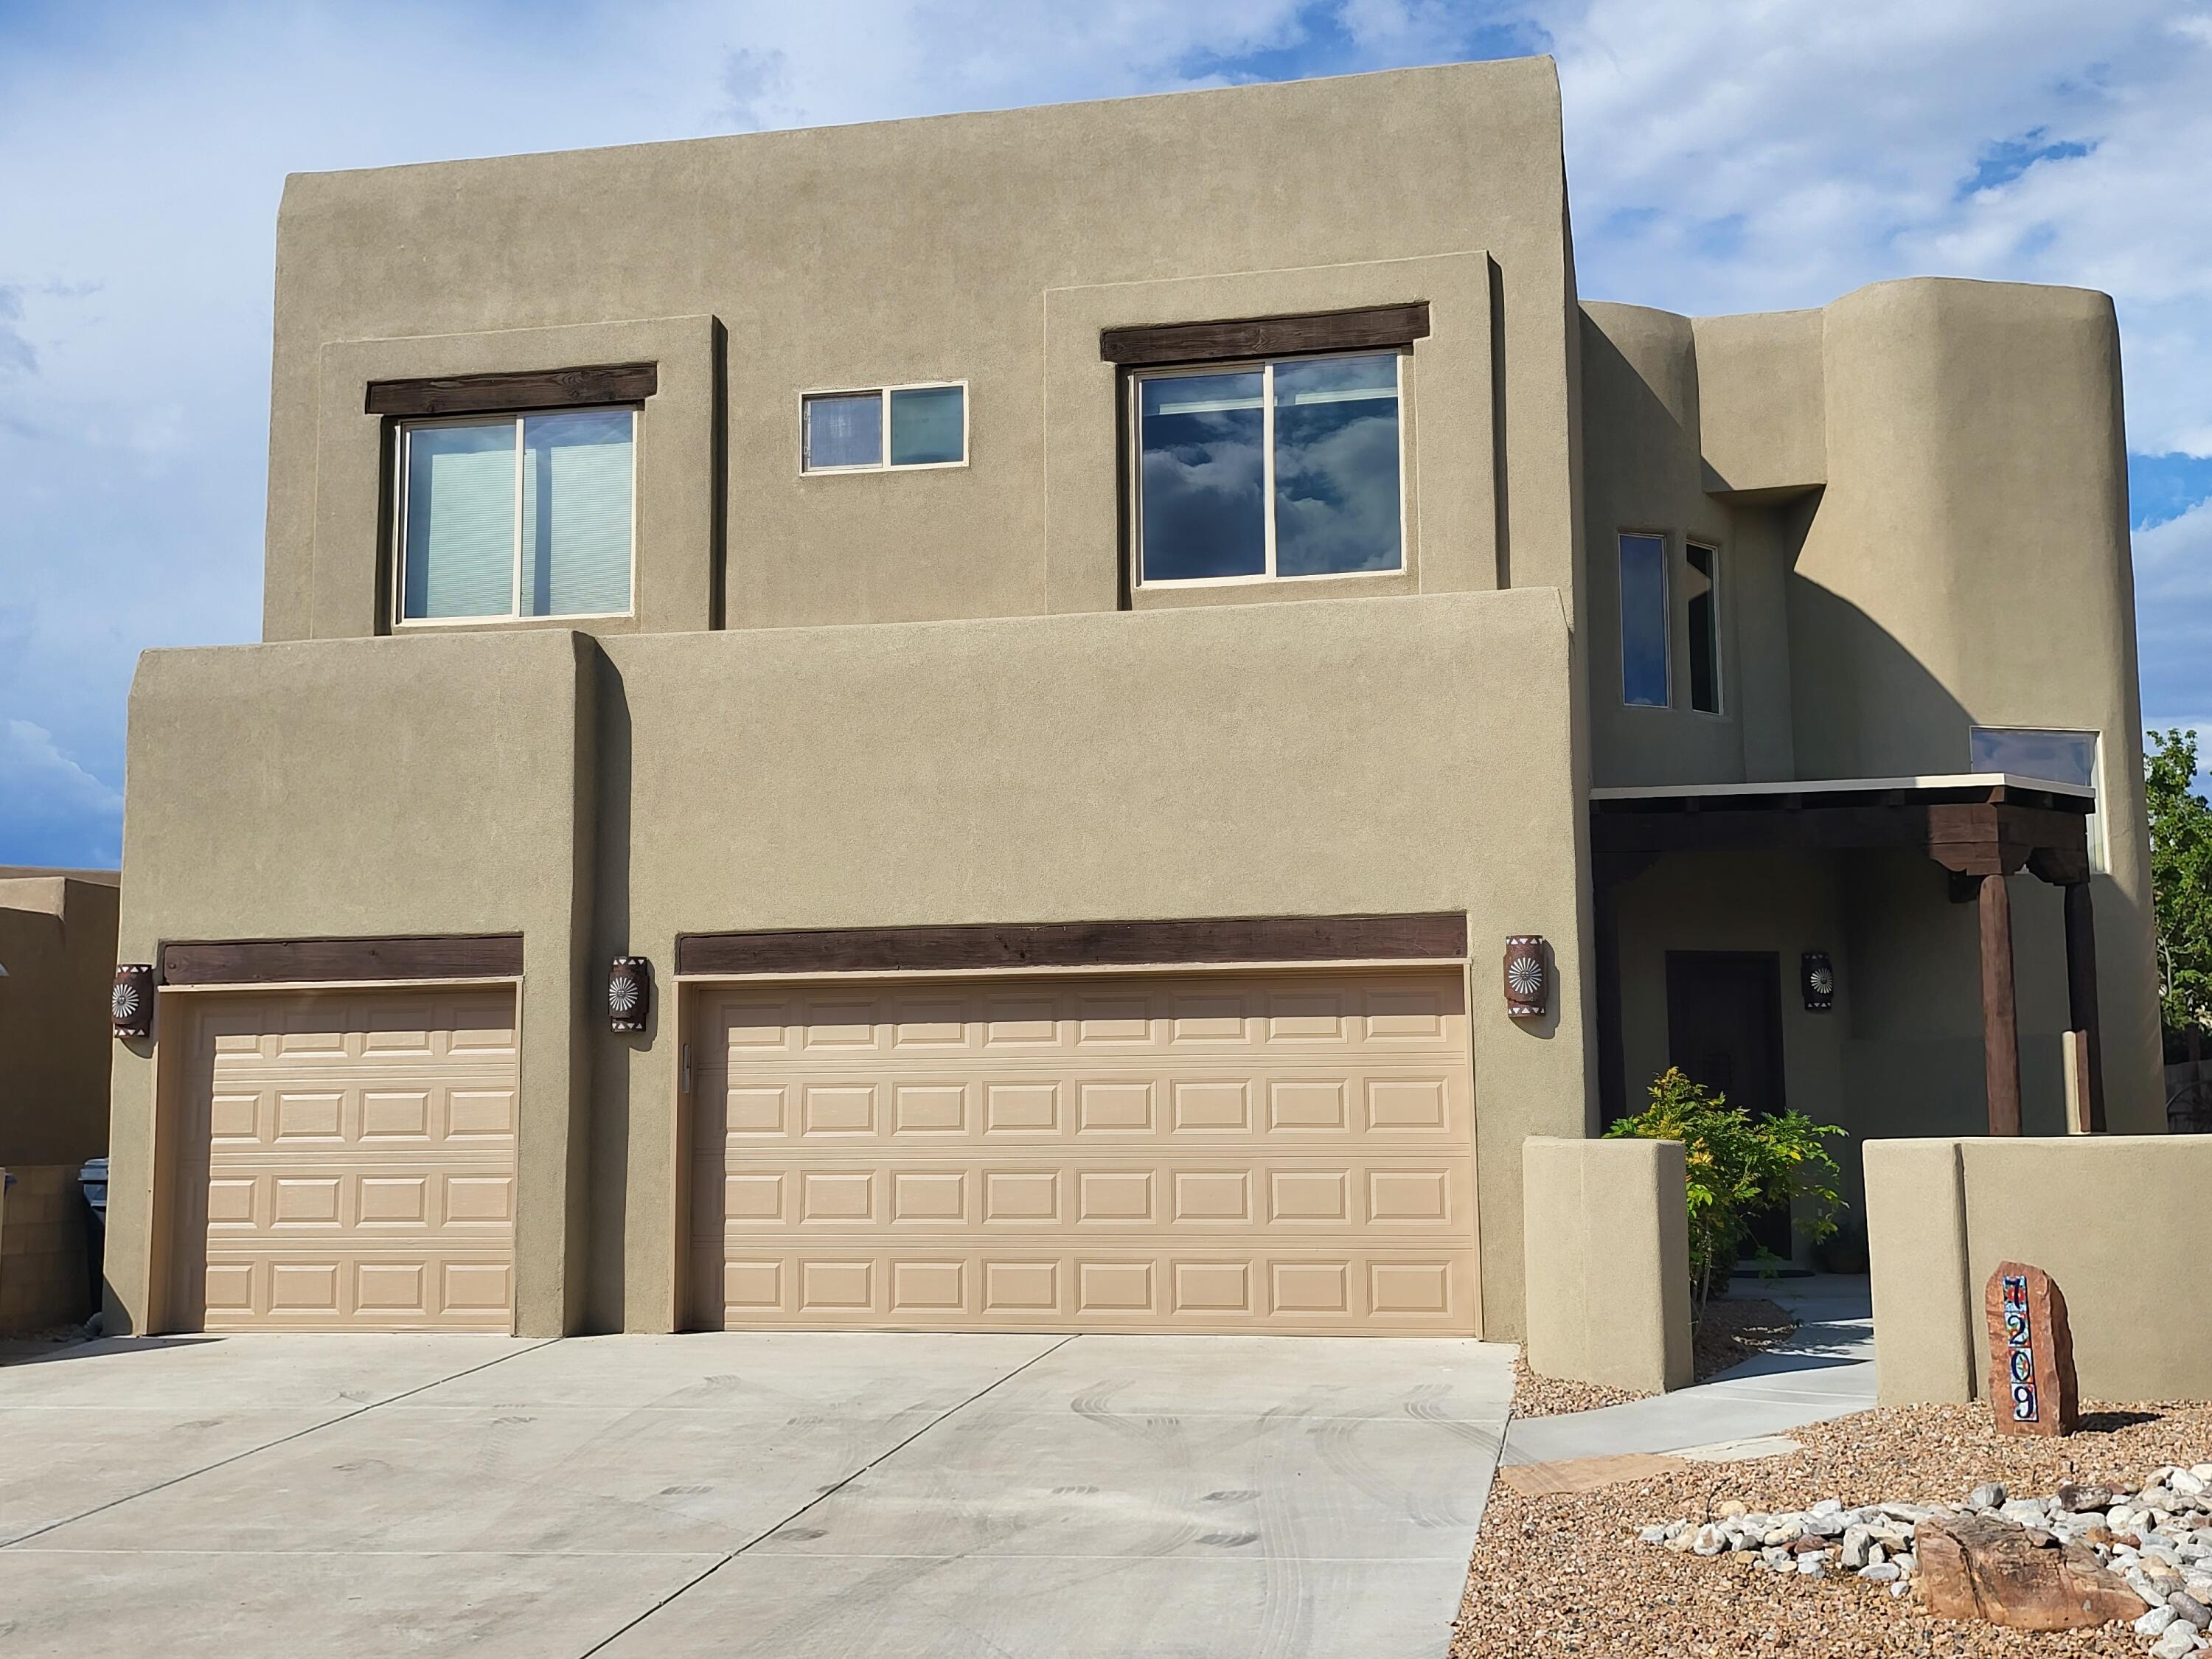 What a great home,  NEW Stucco 2022 ($75k) New TPO Roof 2022 ($46k) New Epoxy garage ($5k). New Carpet ($10K) Tile Floors, Granite counters, S/S appliances, Radiant in floor heat both levels, Refrigerated A/C and Forced Air heat.Main Bathroom is expansive with Large walk-in closet and , jetted tub and walkout deck with Mountain and City Views . backYard Backs Open Space arroyo and has Mountain & City Views .